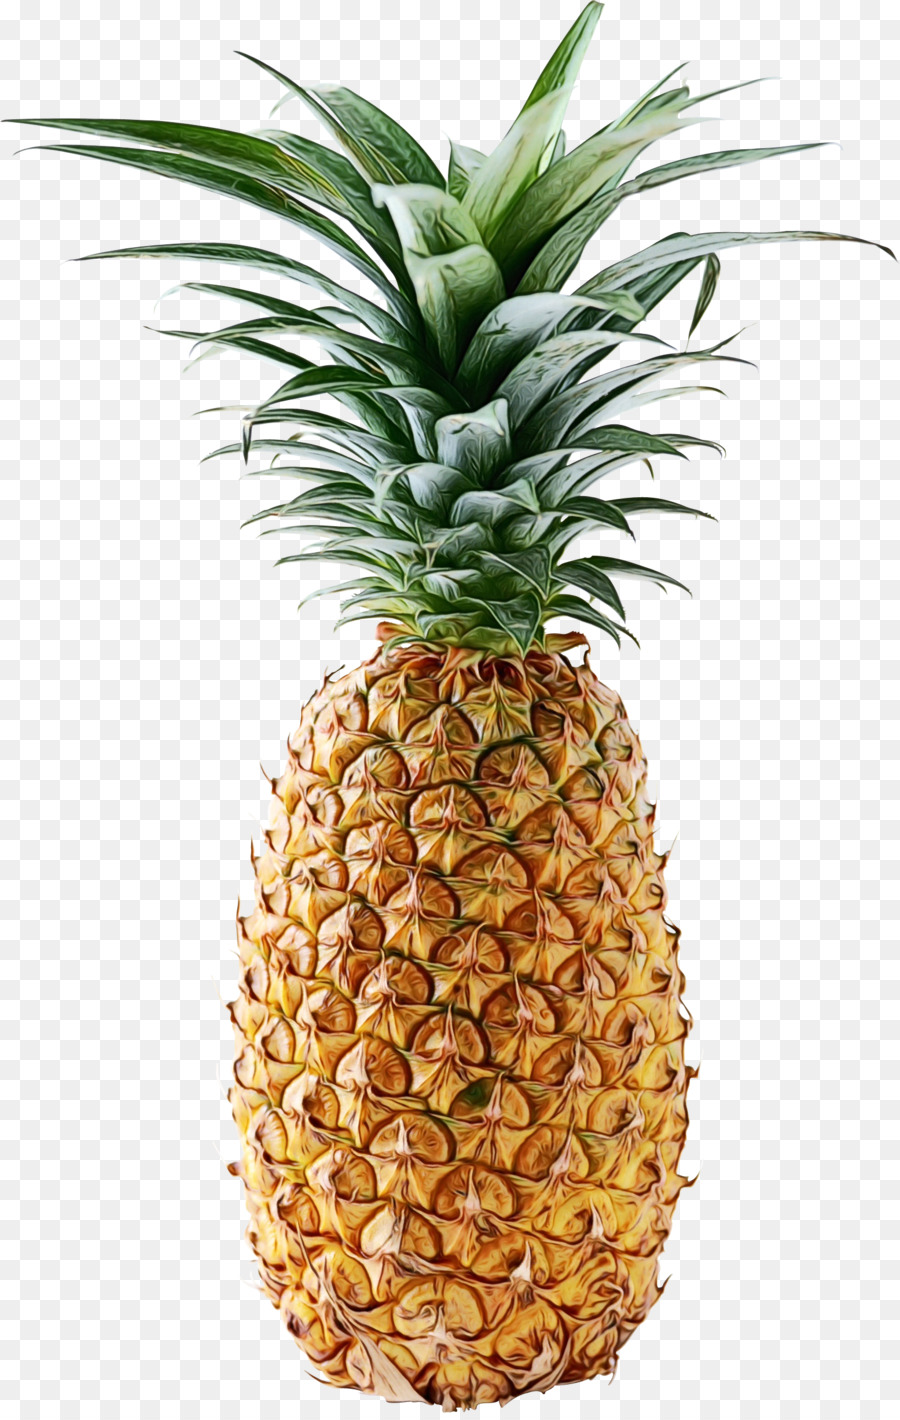 Pineapple cake Portable Network Graphics Clip art Transparency -  png download - 1555*2441 - Free Transparent Pineapple png Download.